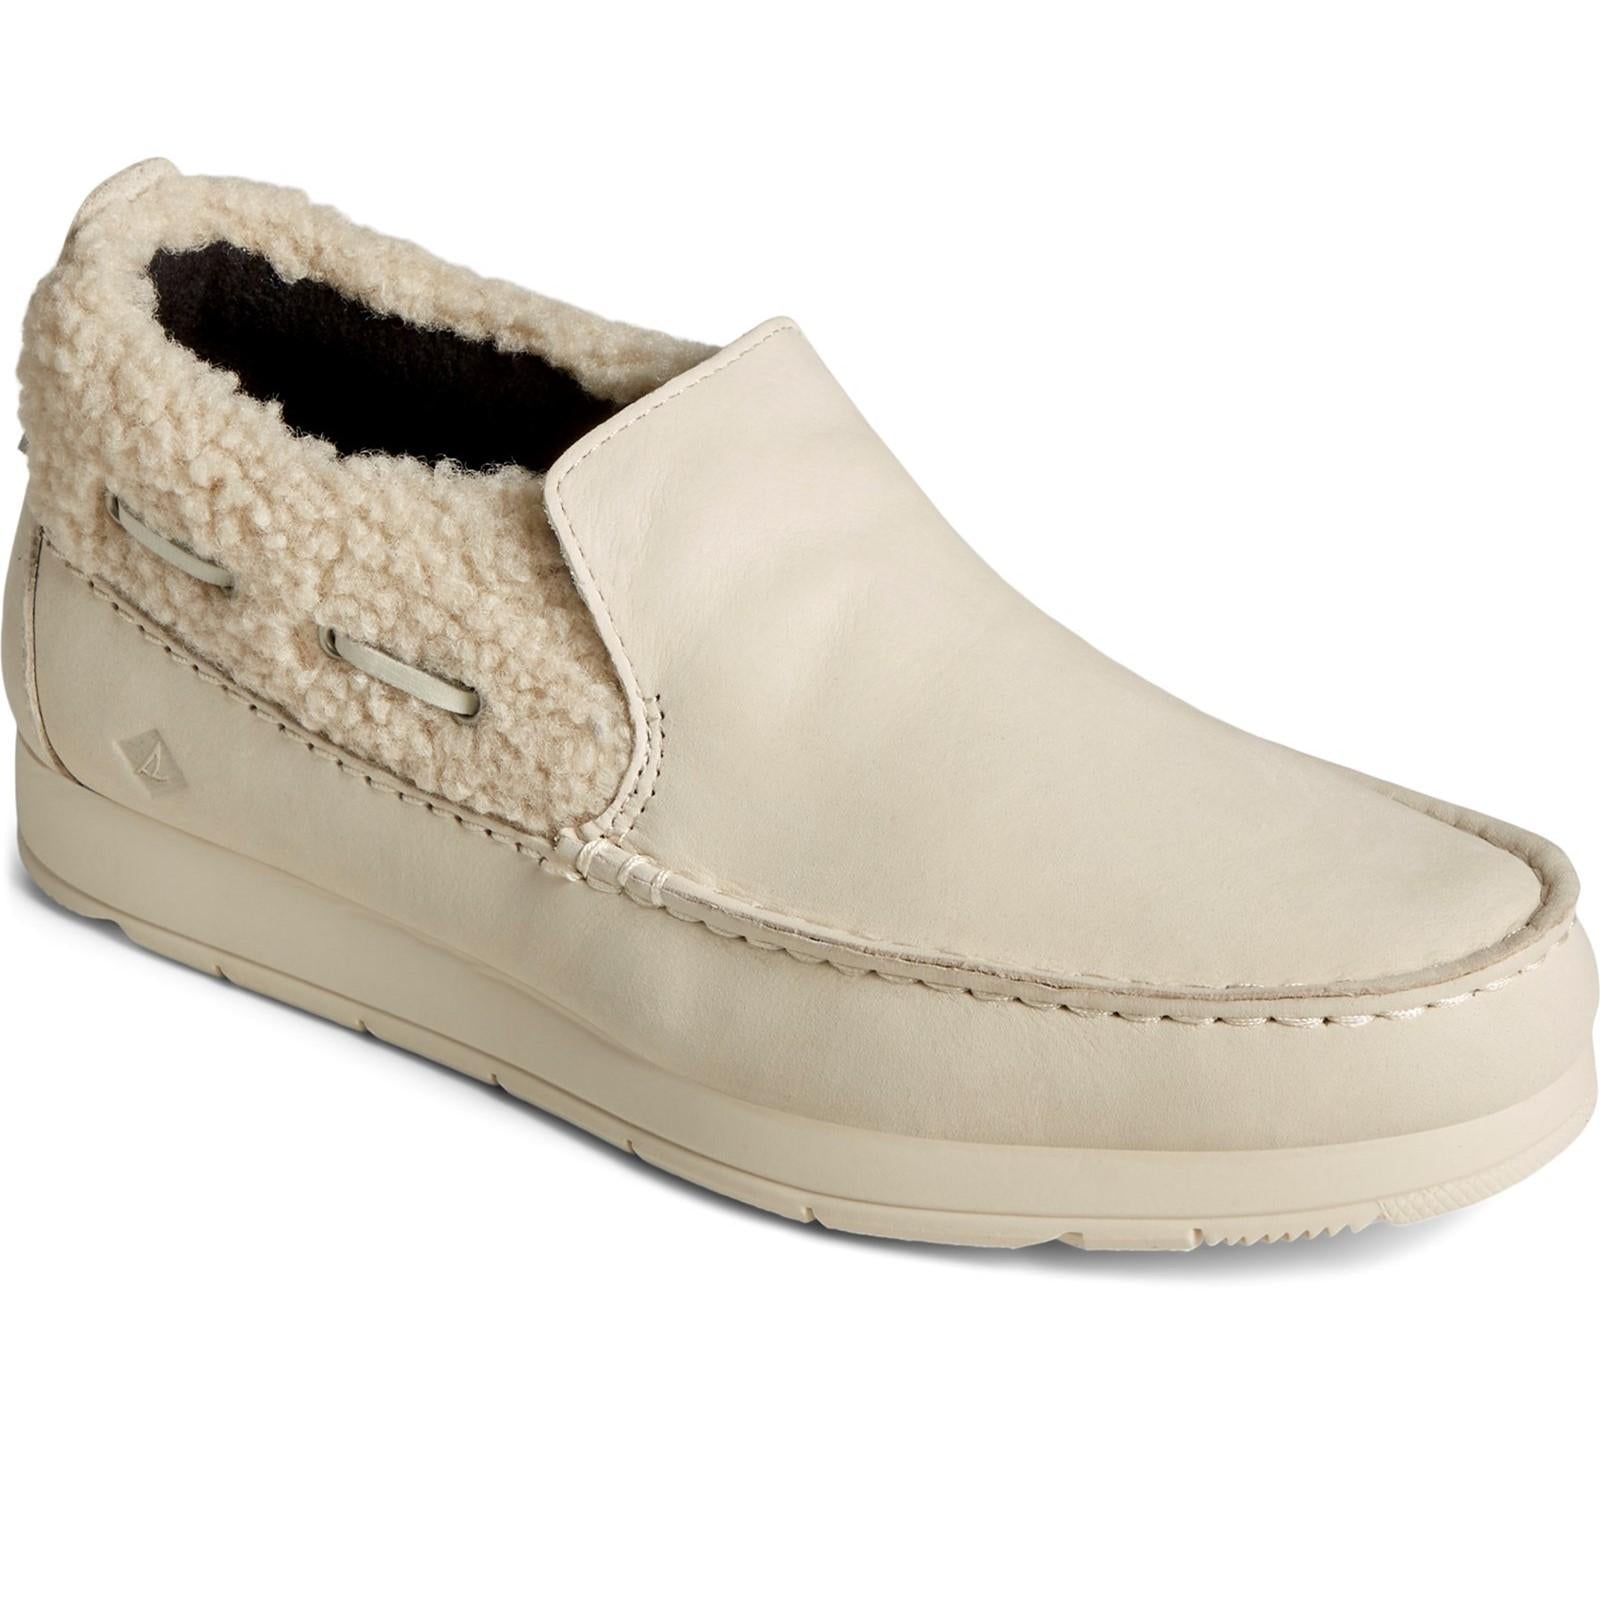 Sperry Top-sider Moc-Sider Leather Teddy Shoe